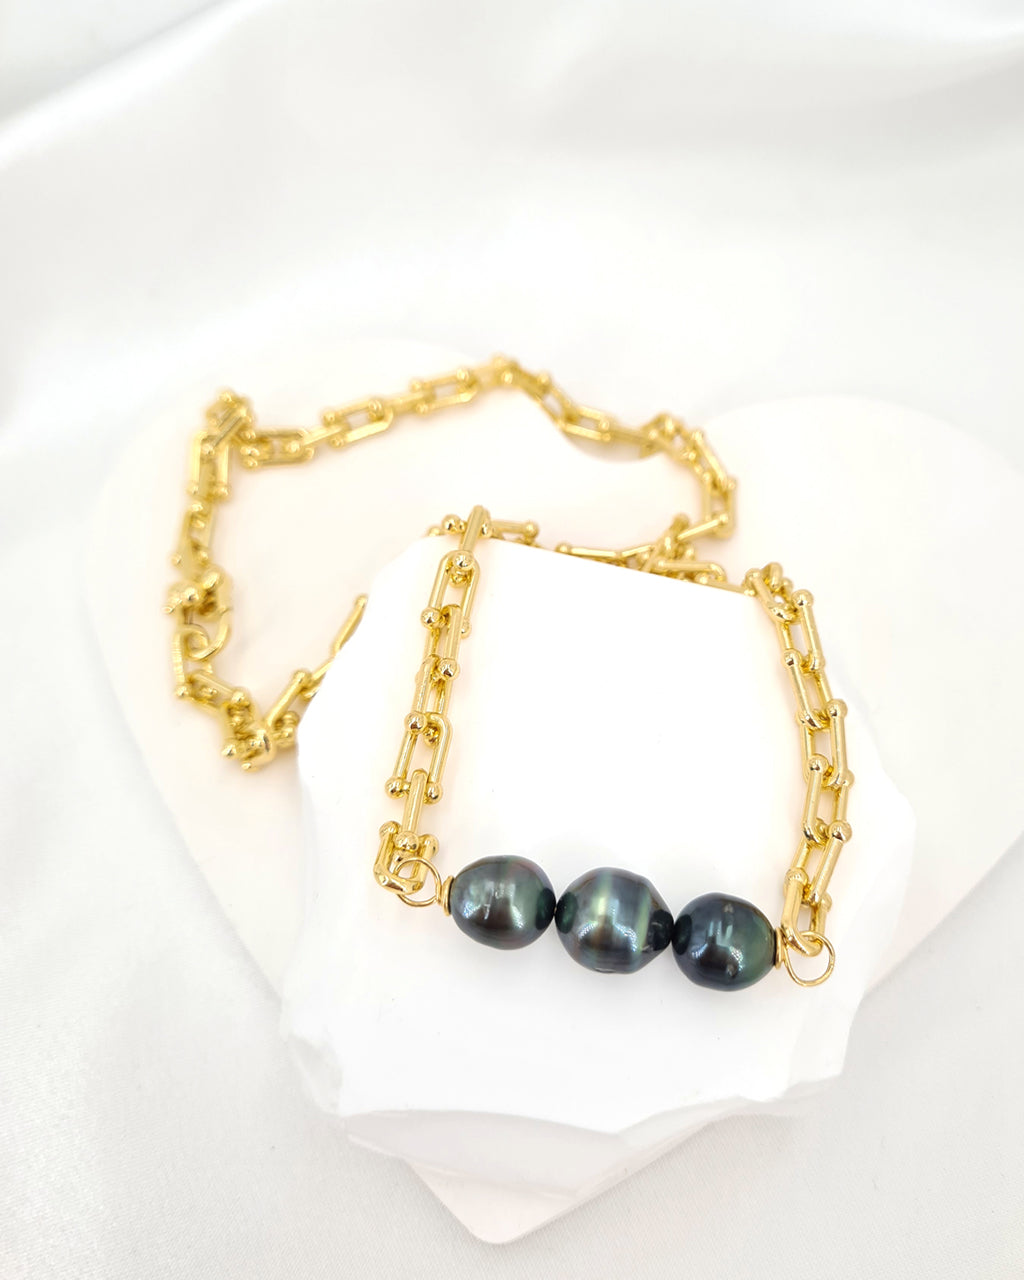 Tahitian Pearl Necklace with Gold Horseshoe Link Chain Handmade in Singapore